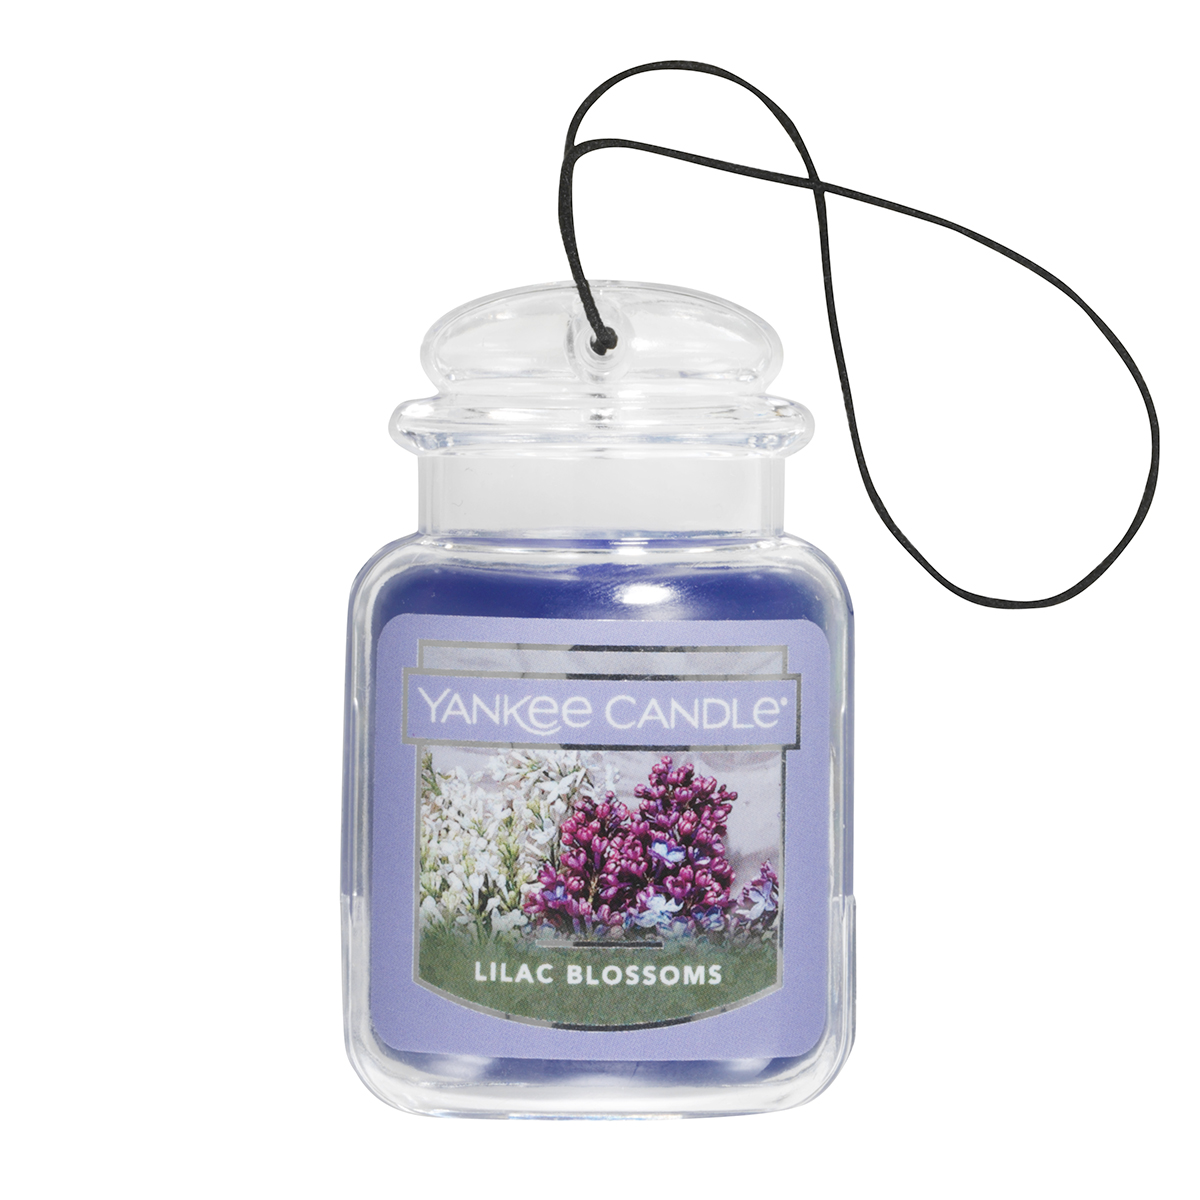 Yankee Candle(R) Car Jar(R) Ultimate Lilac Blossoms